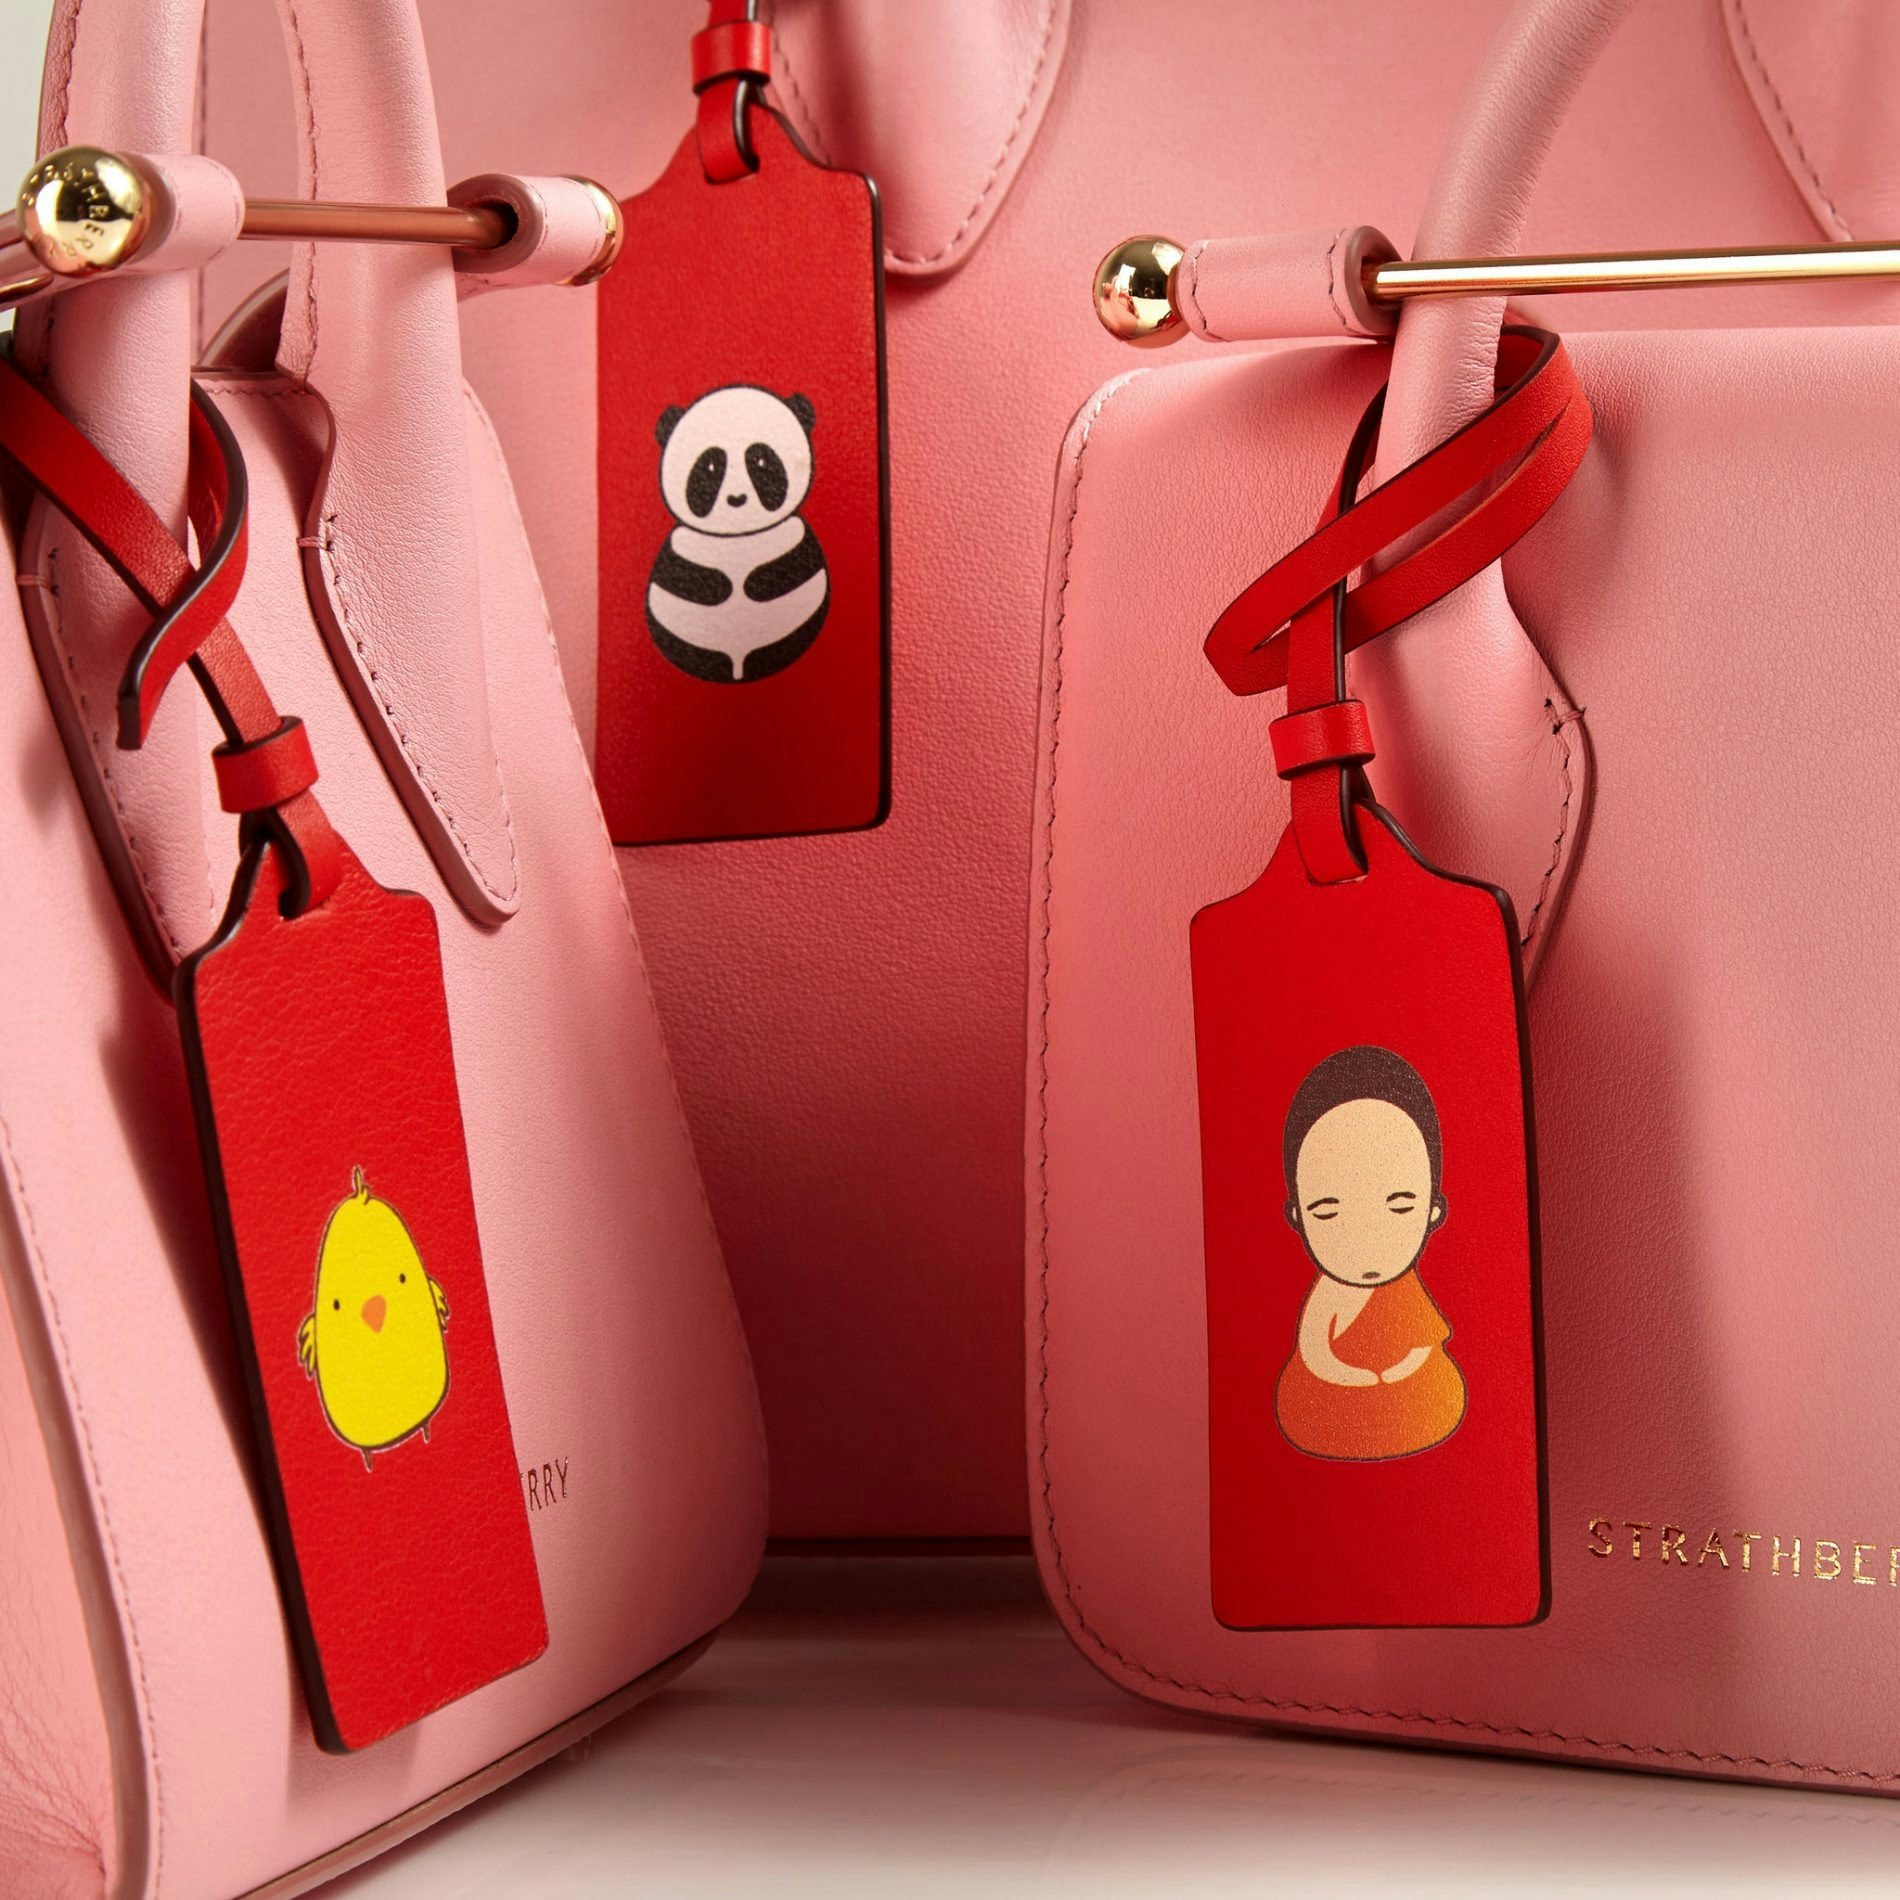 Mr. Bags said he helped Strathberry with each of the illustrations so that they held symbolic connotations for Chinese consumers. (Courtesy Photo)